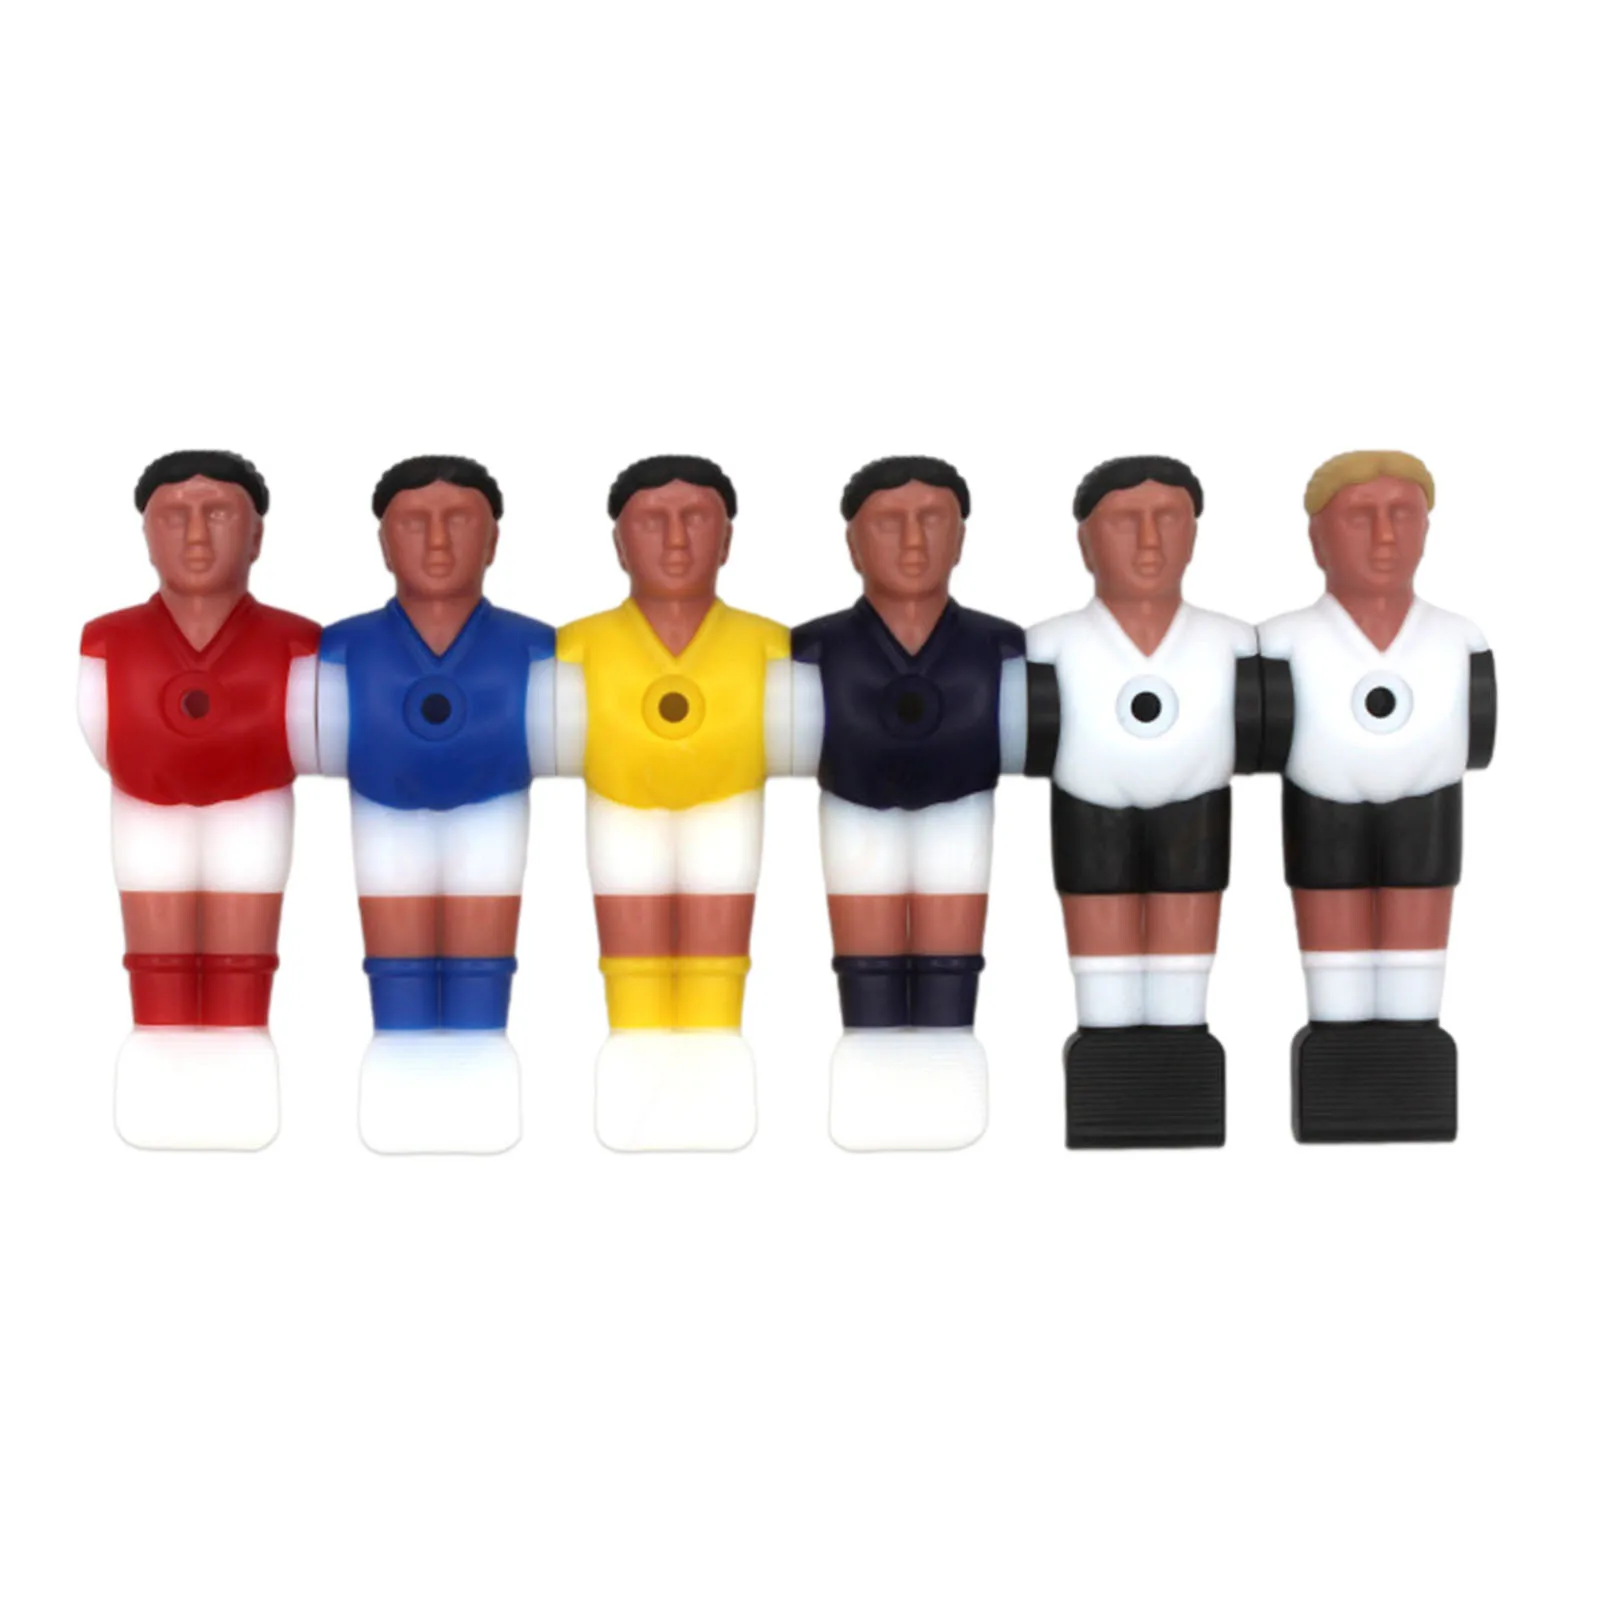 

Foosball Player Football Foosball Men Table Guys Table Football Machine Accessory For Table Soccer Games Entertainment 5 Color